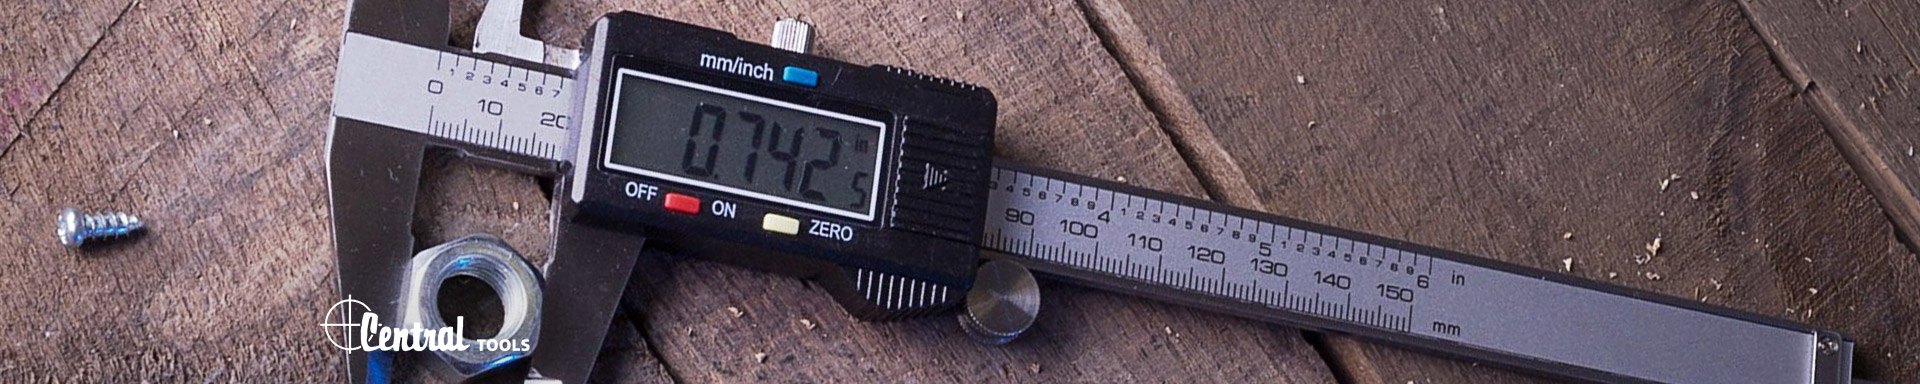 Central Tools Distance Measuring Tools